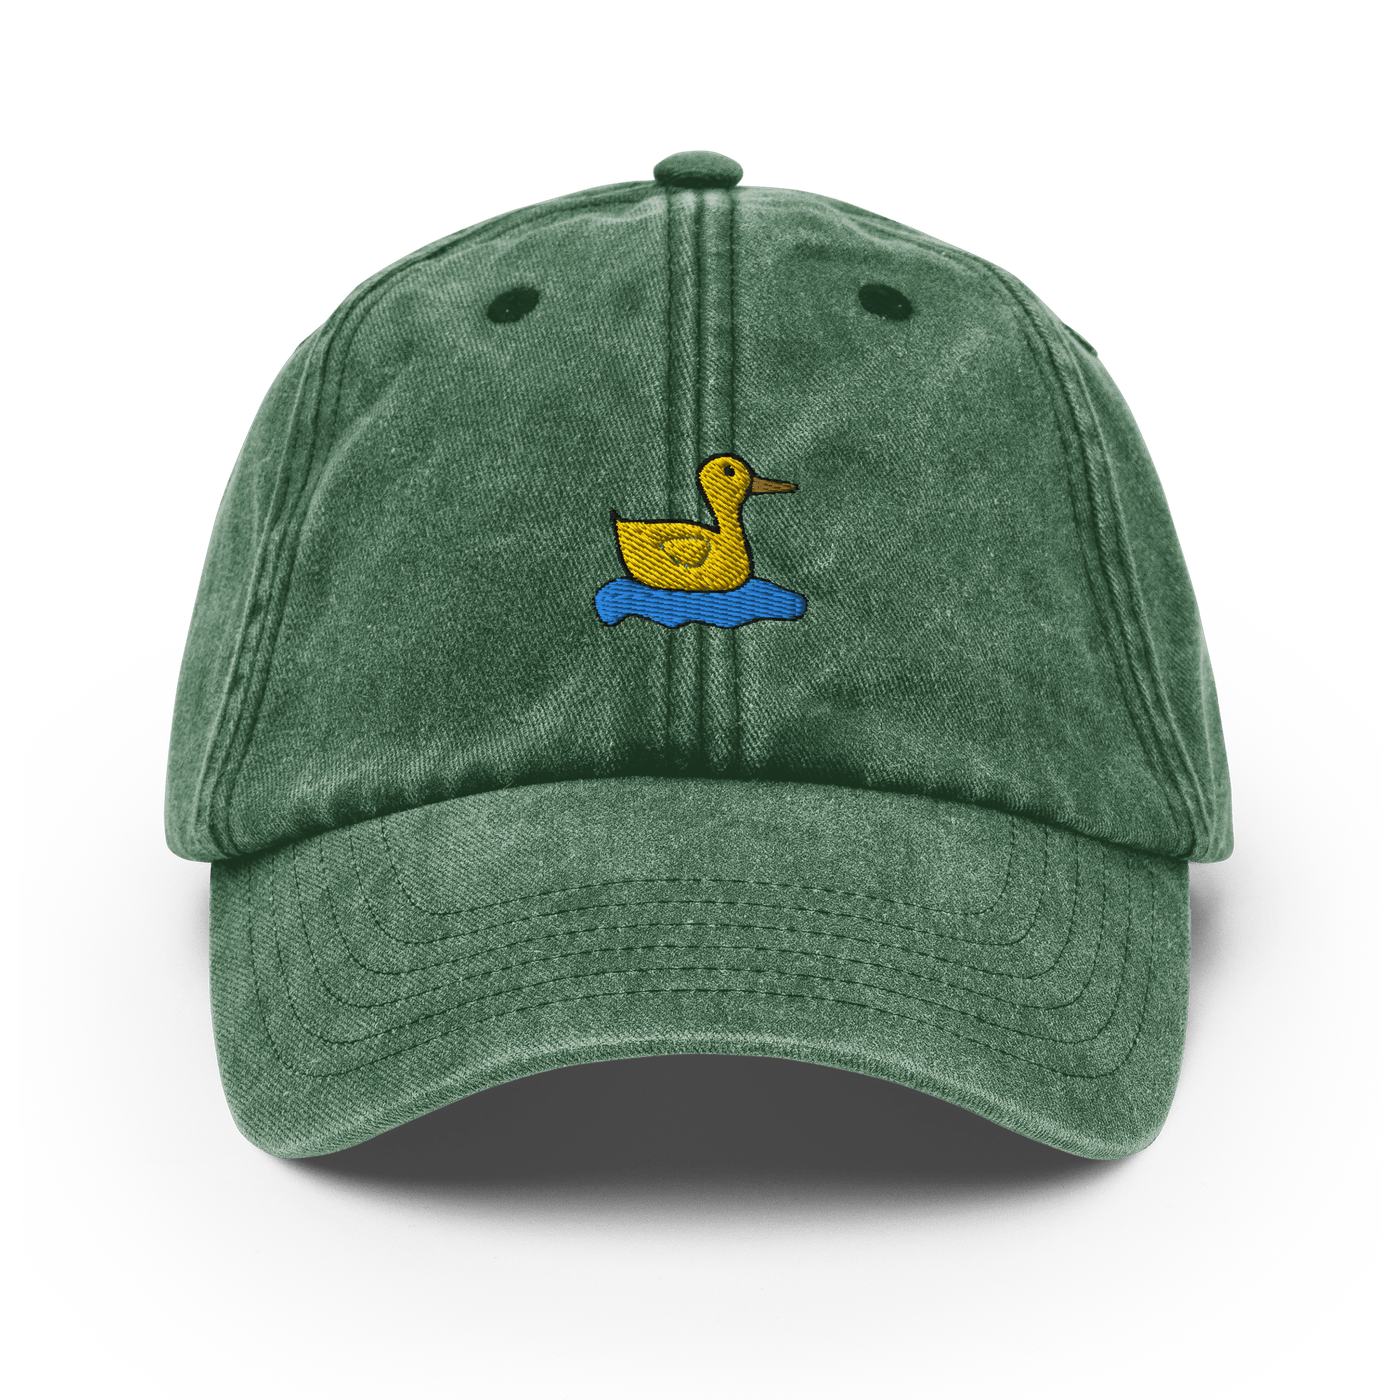 Lonely Duck Vintage Hat - Vintage Bottle Green - - Just Another Cap Store